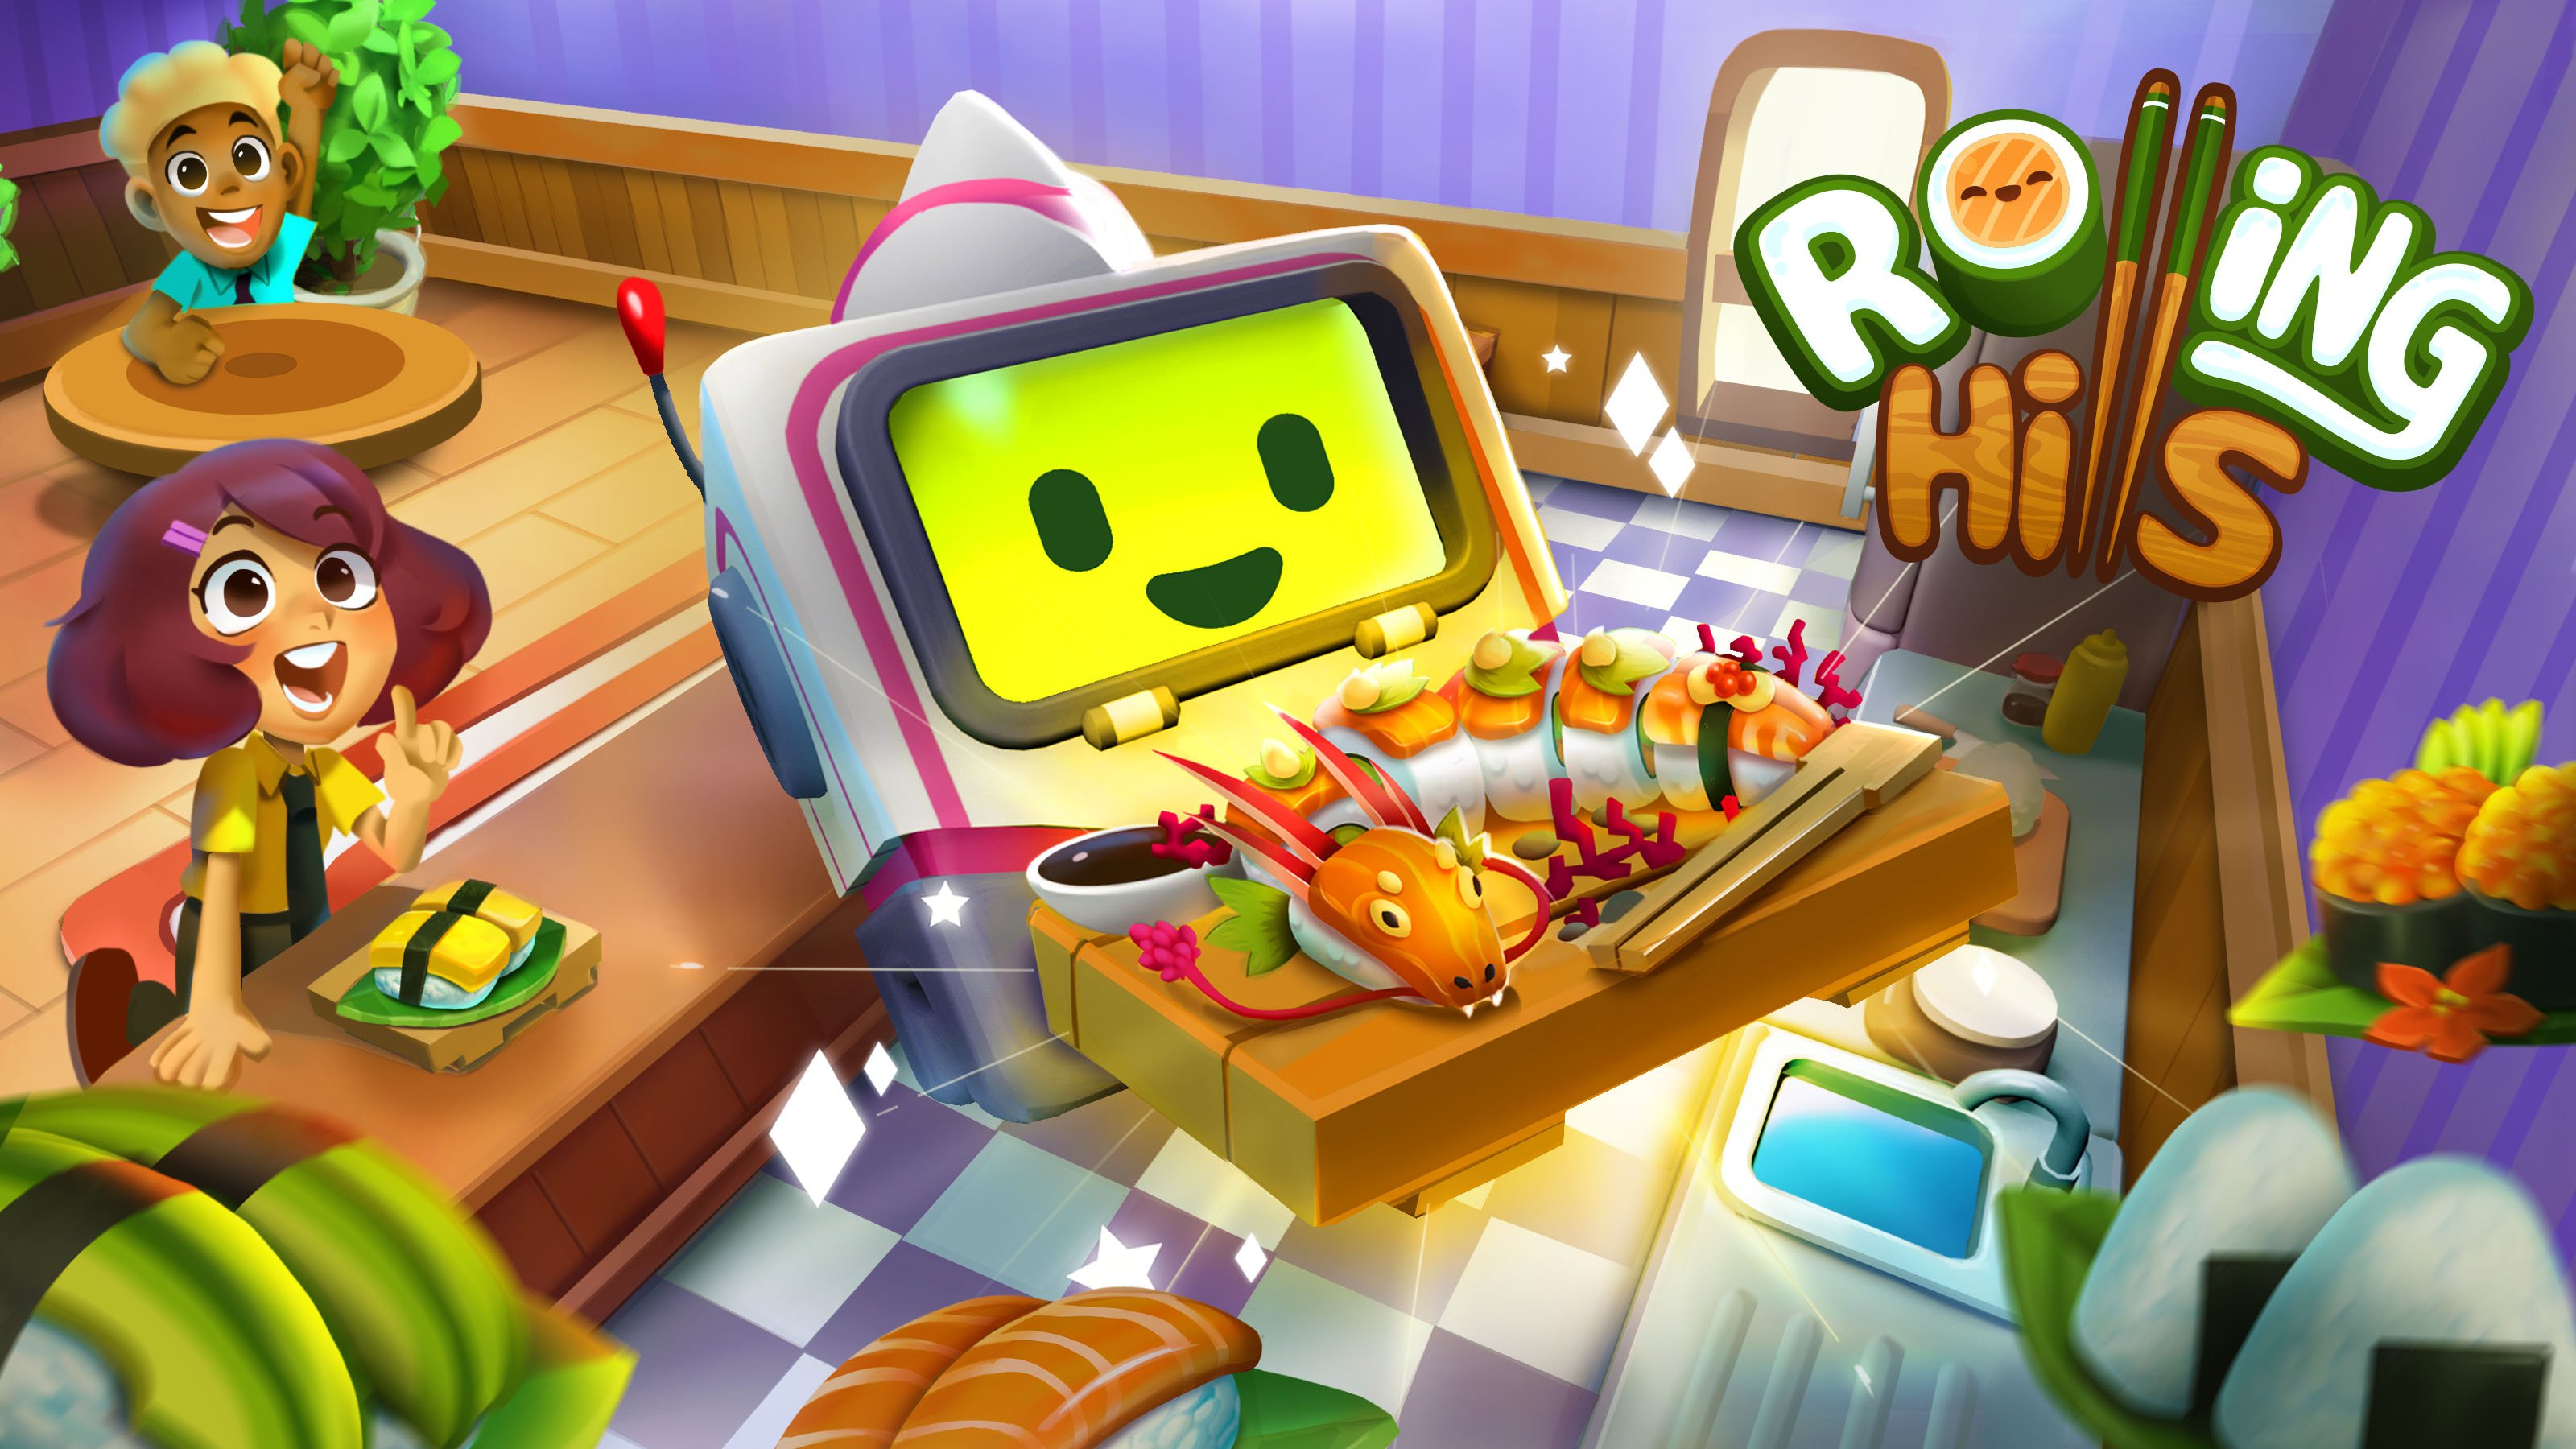 #
      Cozy sushi restaurant life simulation game Rolling Hills announced for Xbox One, PC